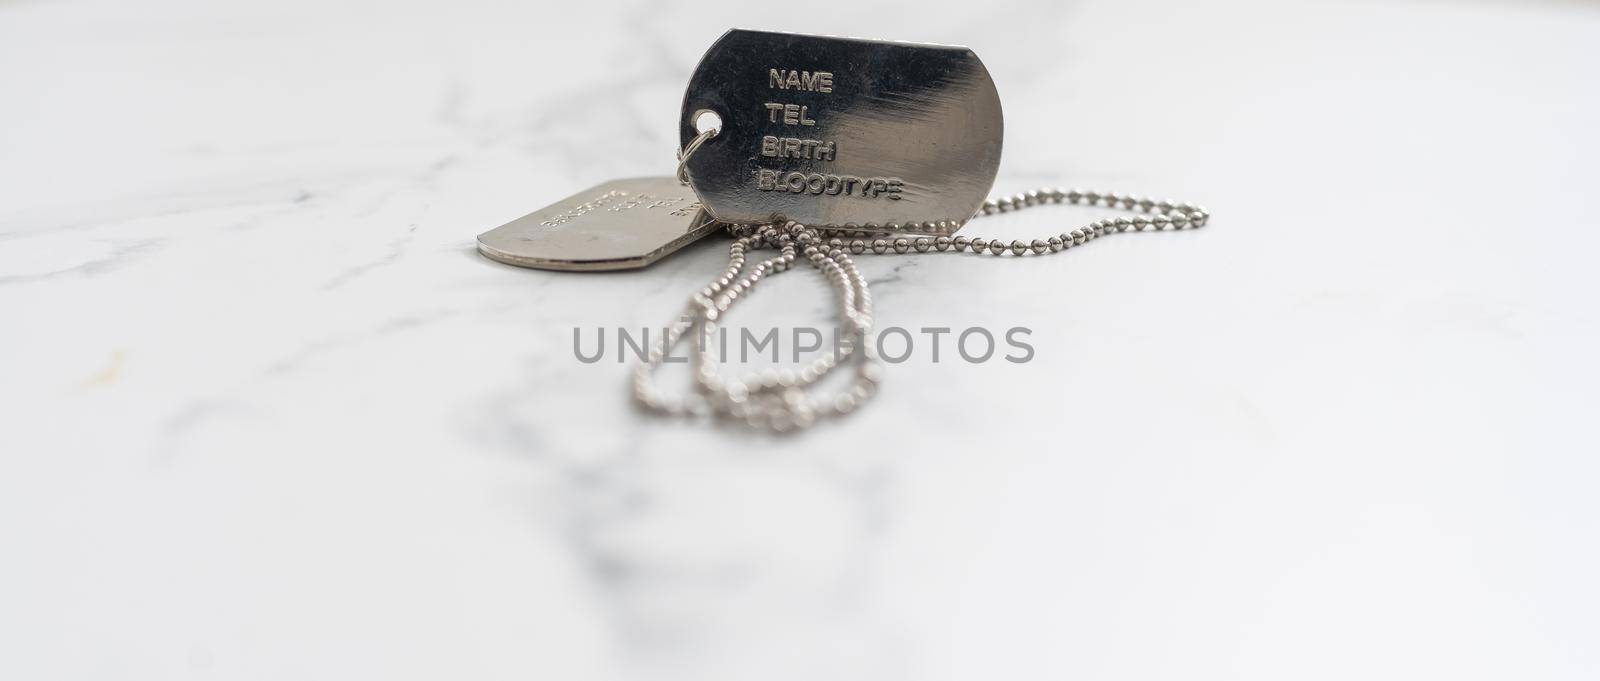 Old and worn military dog tags - Blank.